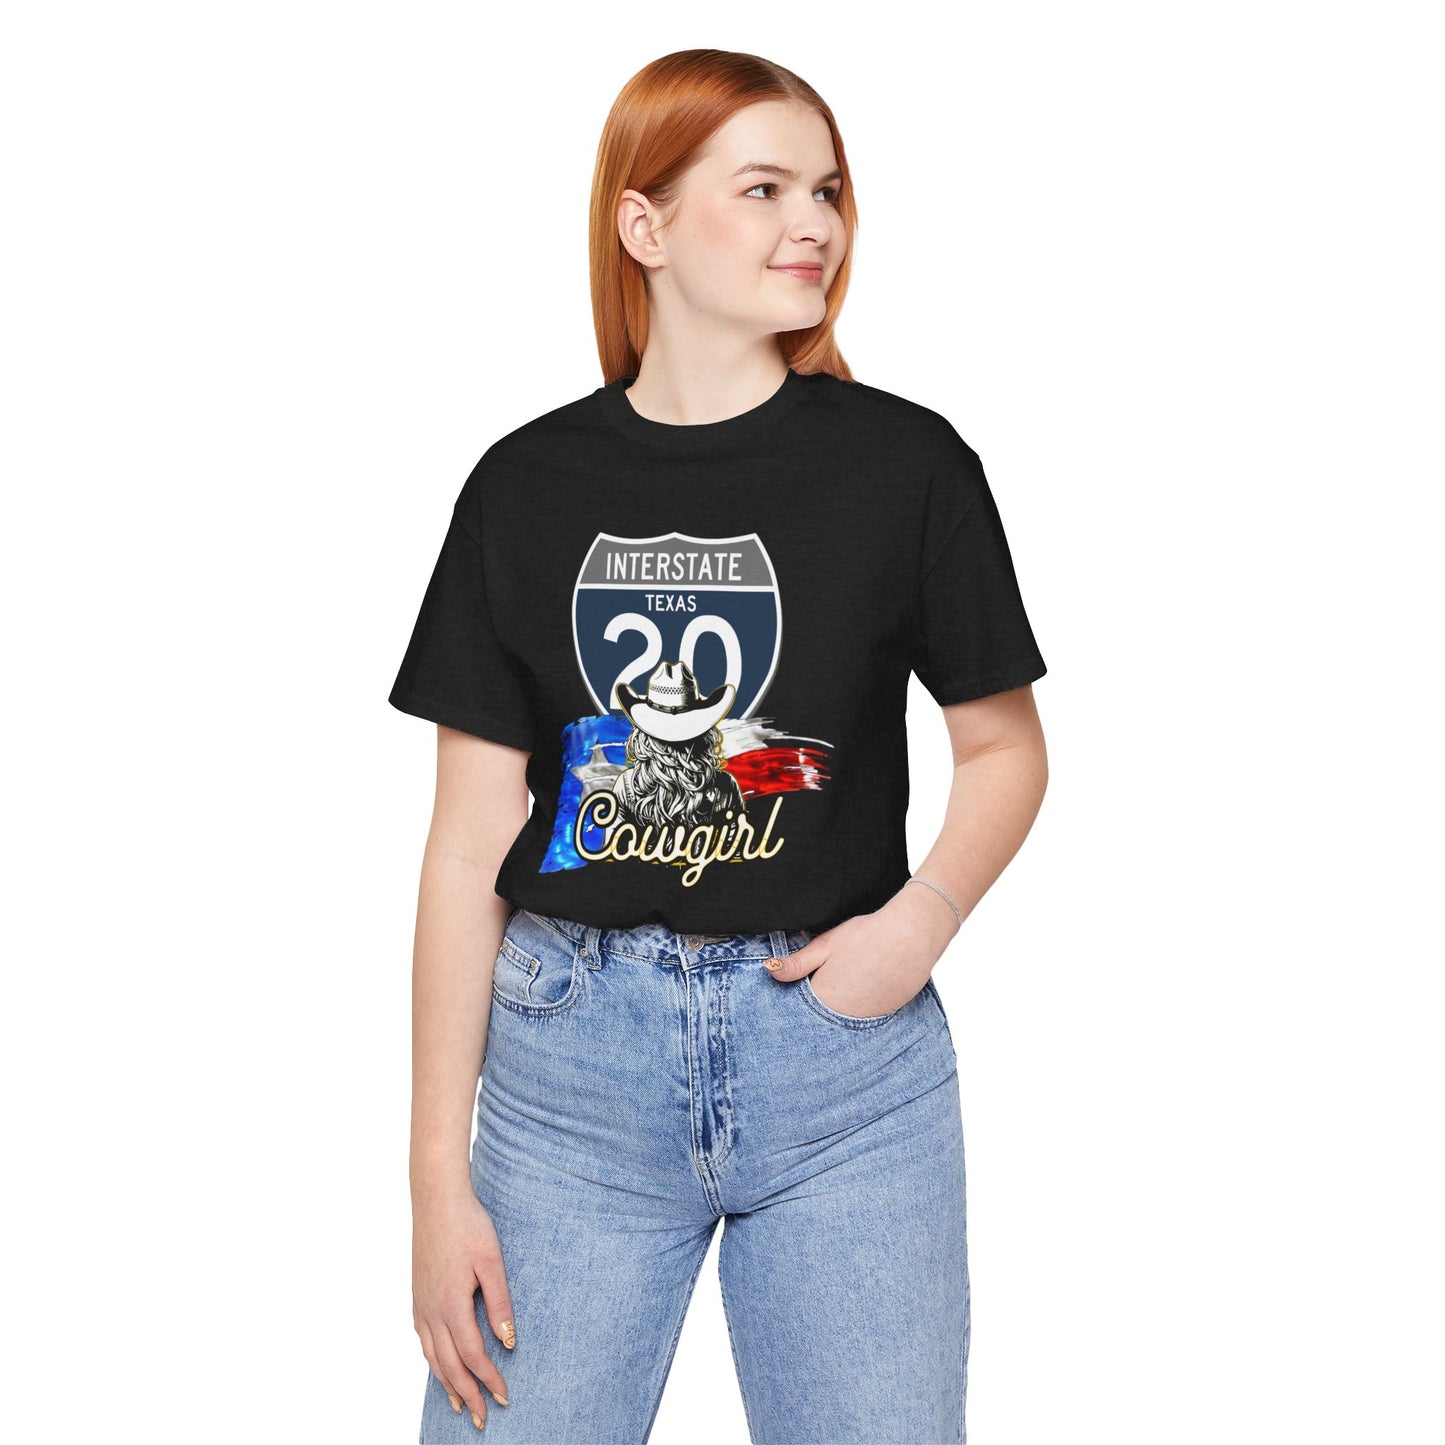 Interstate 20 Texas Cowgirl Highway Route Tee Shirt - Soft Blend T-Shirt